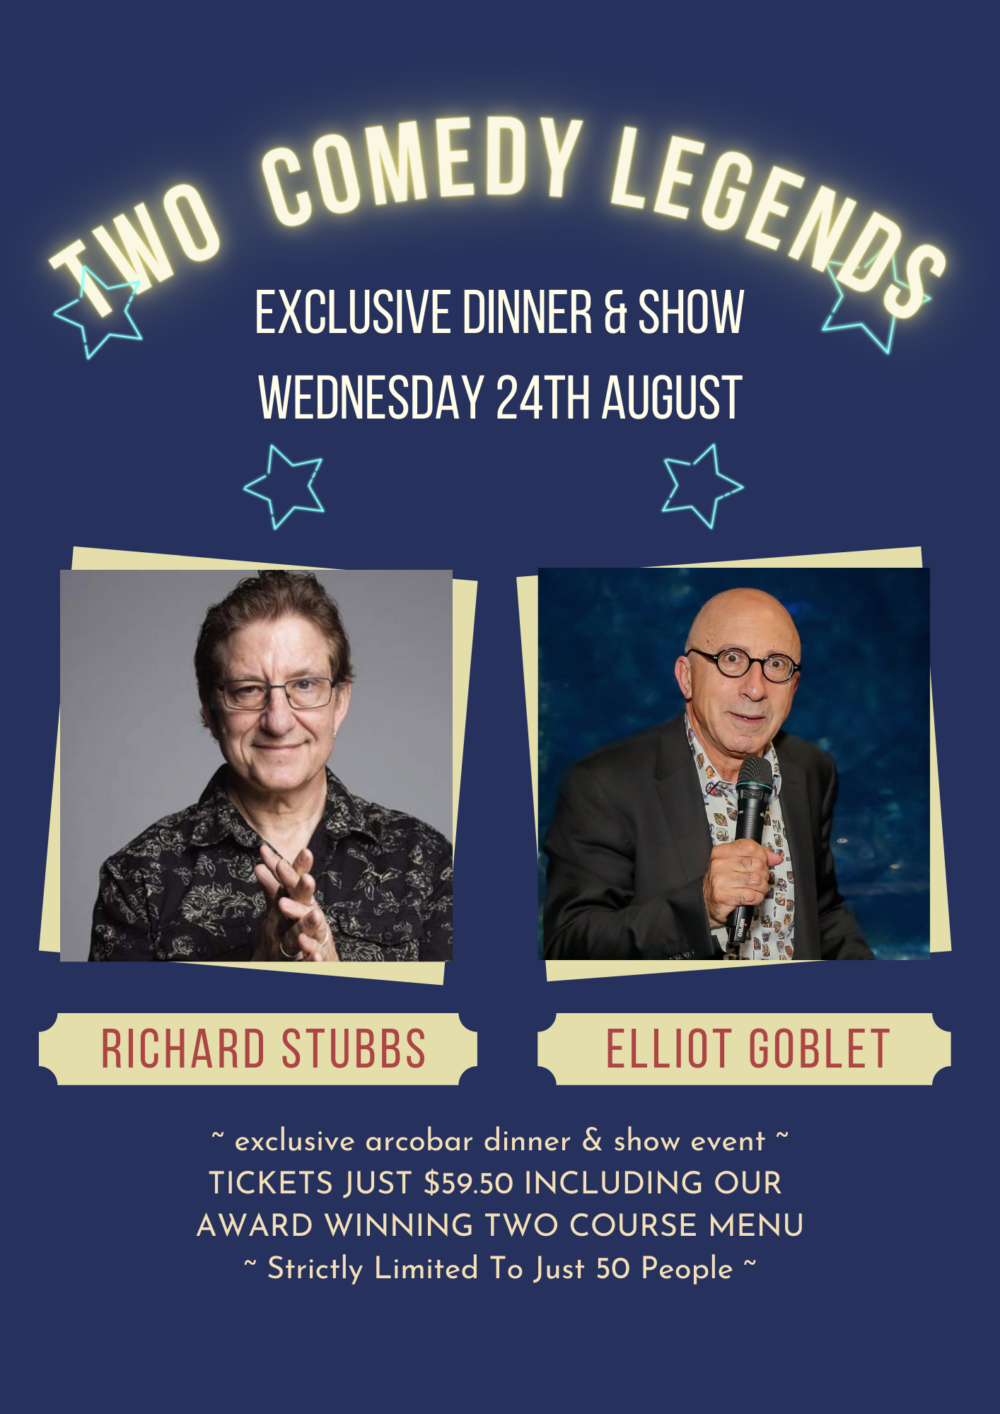 Comedy LEGENDS Dinner & Show - Featuring Melbourne's Own Richard Stubbs & Special Guest Elliot Goblet